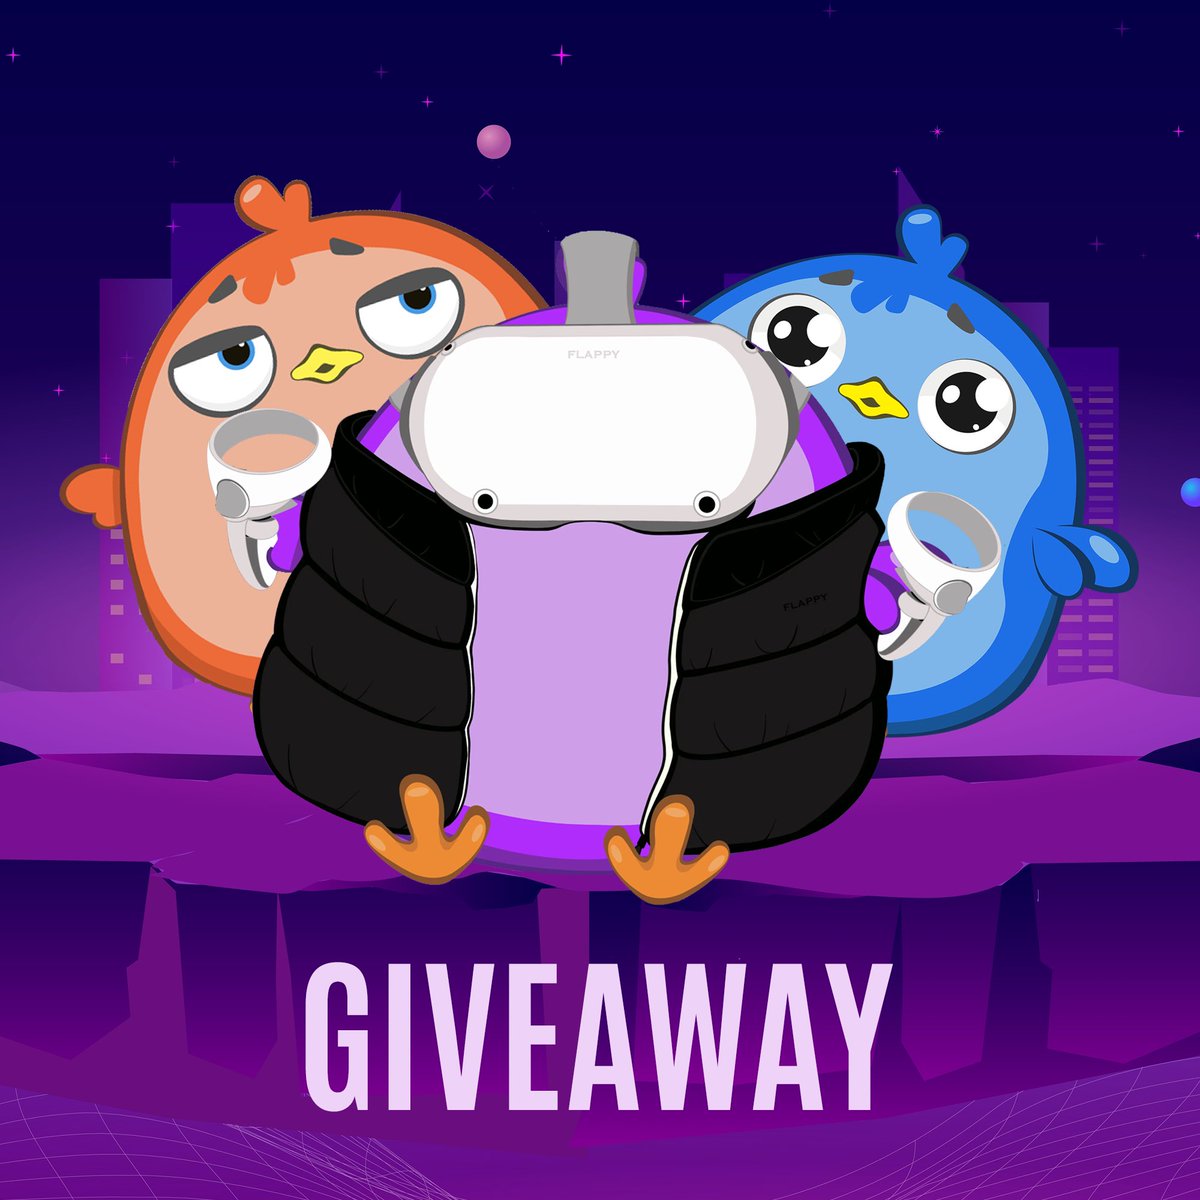 Good morning, Flappies! 15 WL spots available for Flappy Birds NFT ￼ Special prize: ￼🏆 1 SOL ￼❗️To enter giveaway: - Follow @FlappyBirds_NFT - RT this post - Tag 2 friends ￼⌚️48H #NFT #NFTs #NFTGiveaway #FlappyBird #FlappyBirds